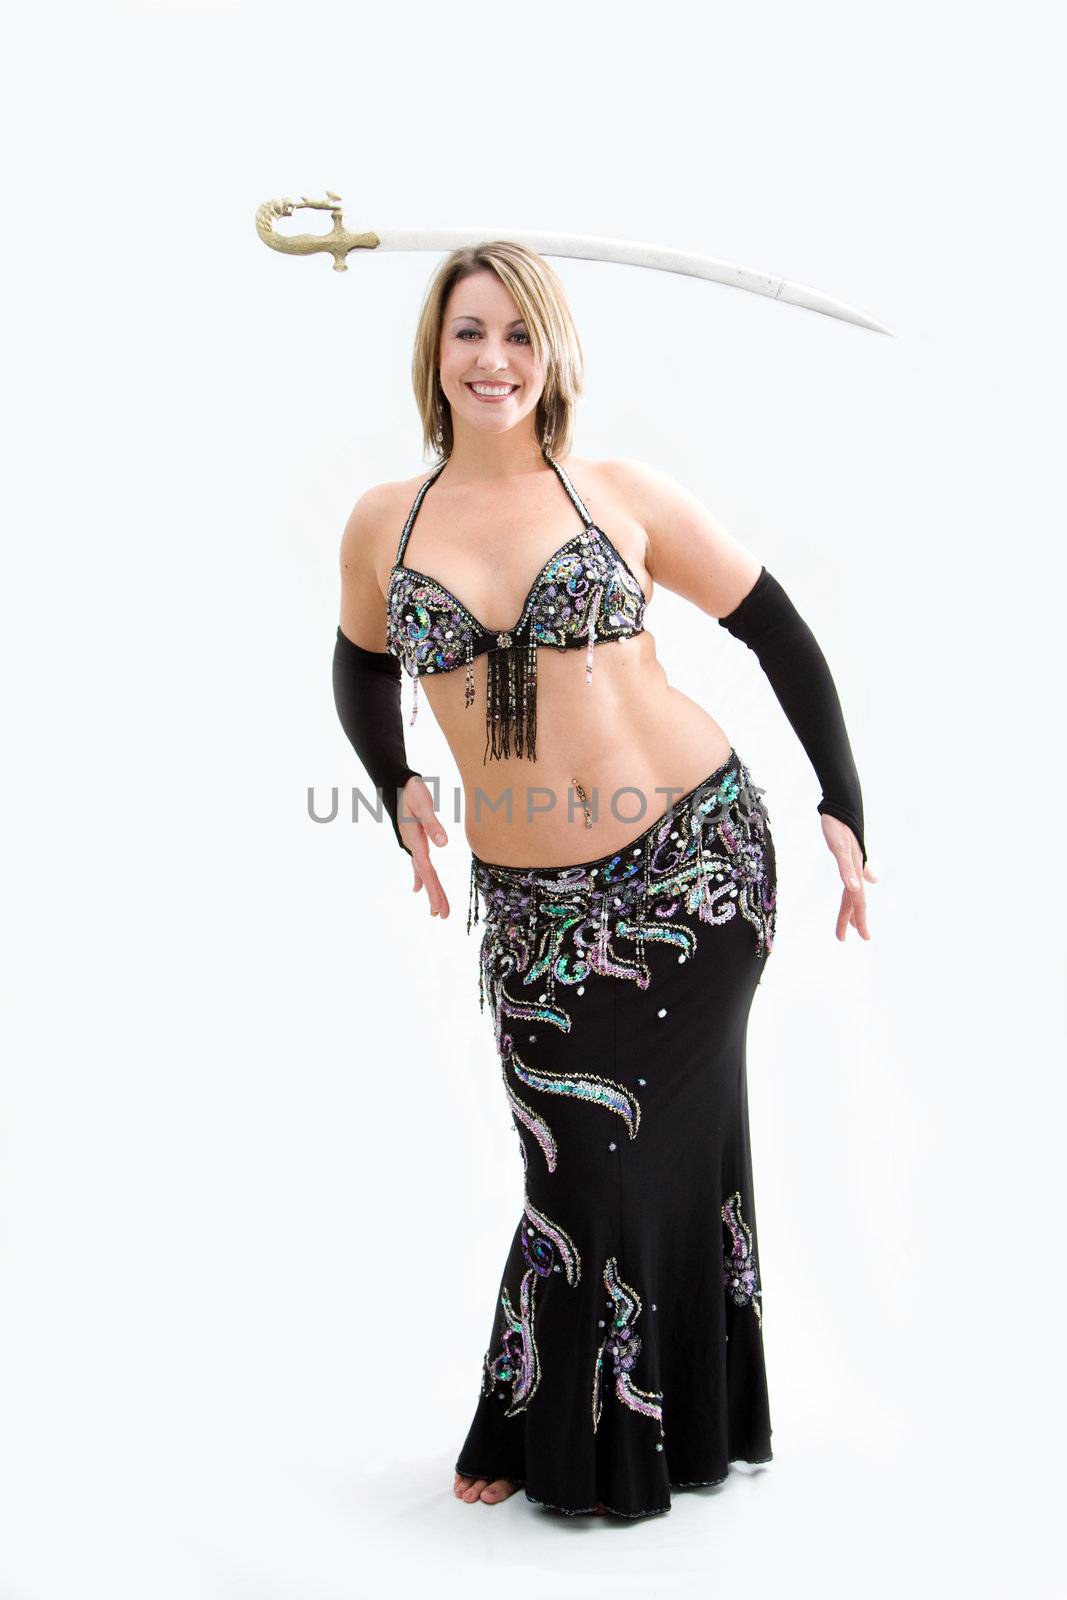 Belly dancer in black by phakimata